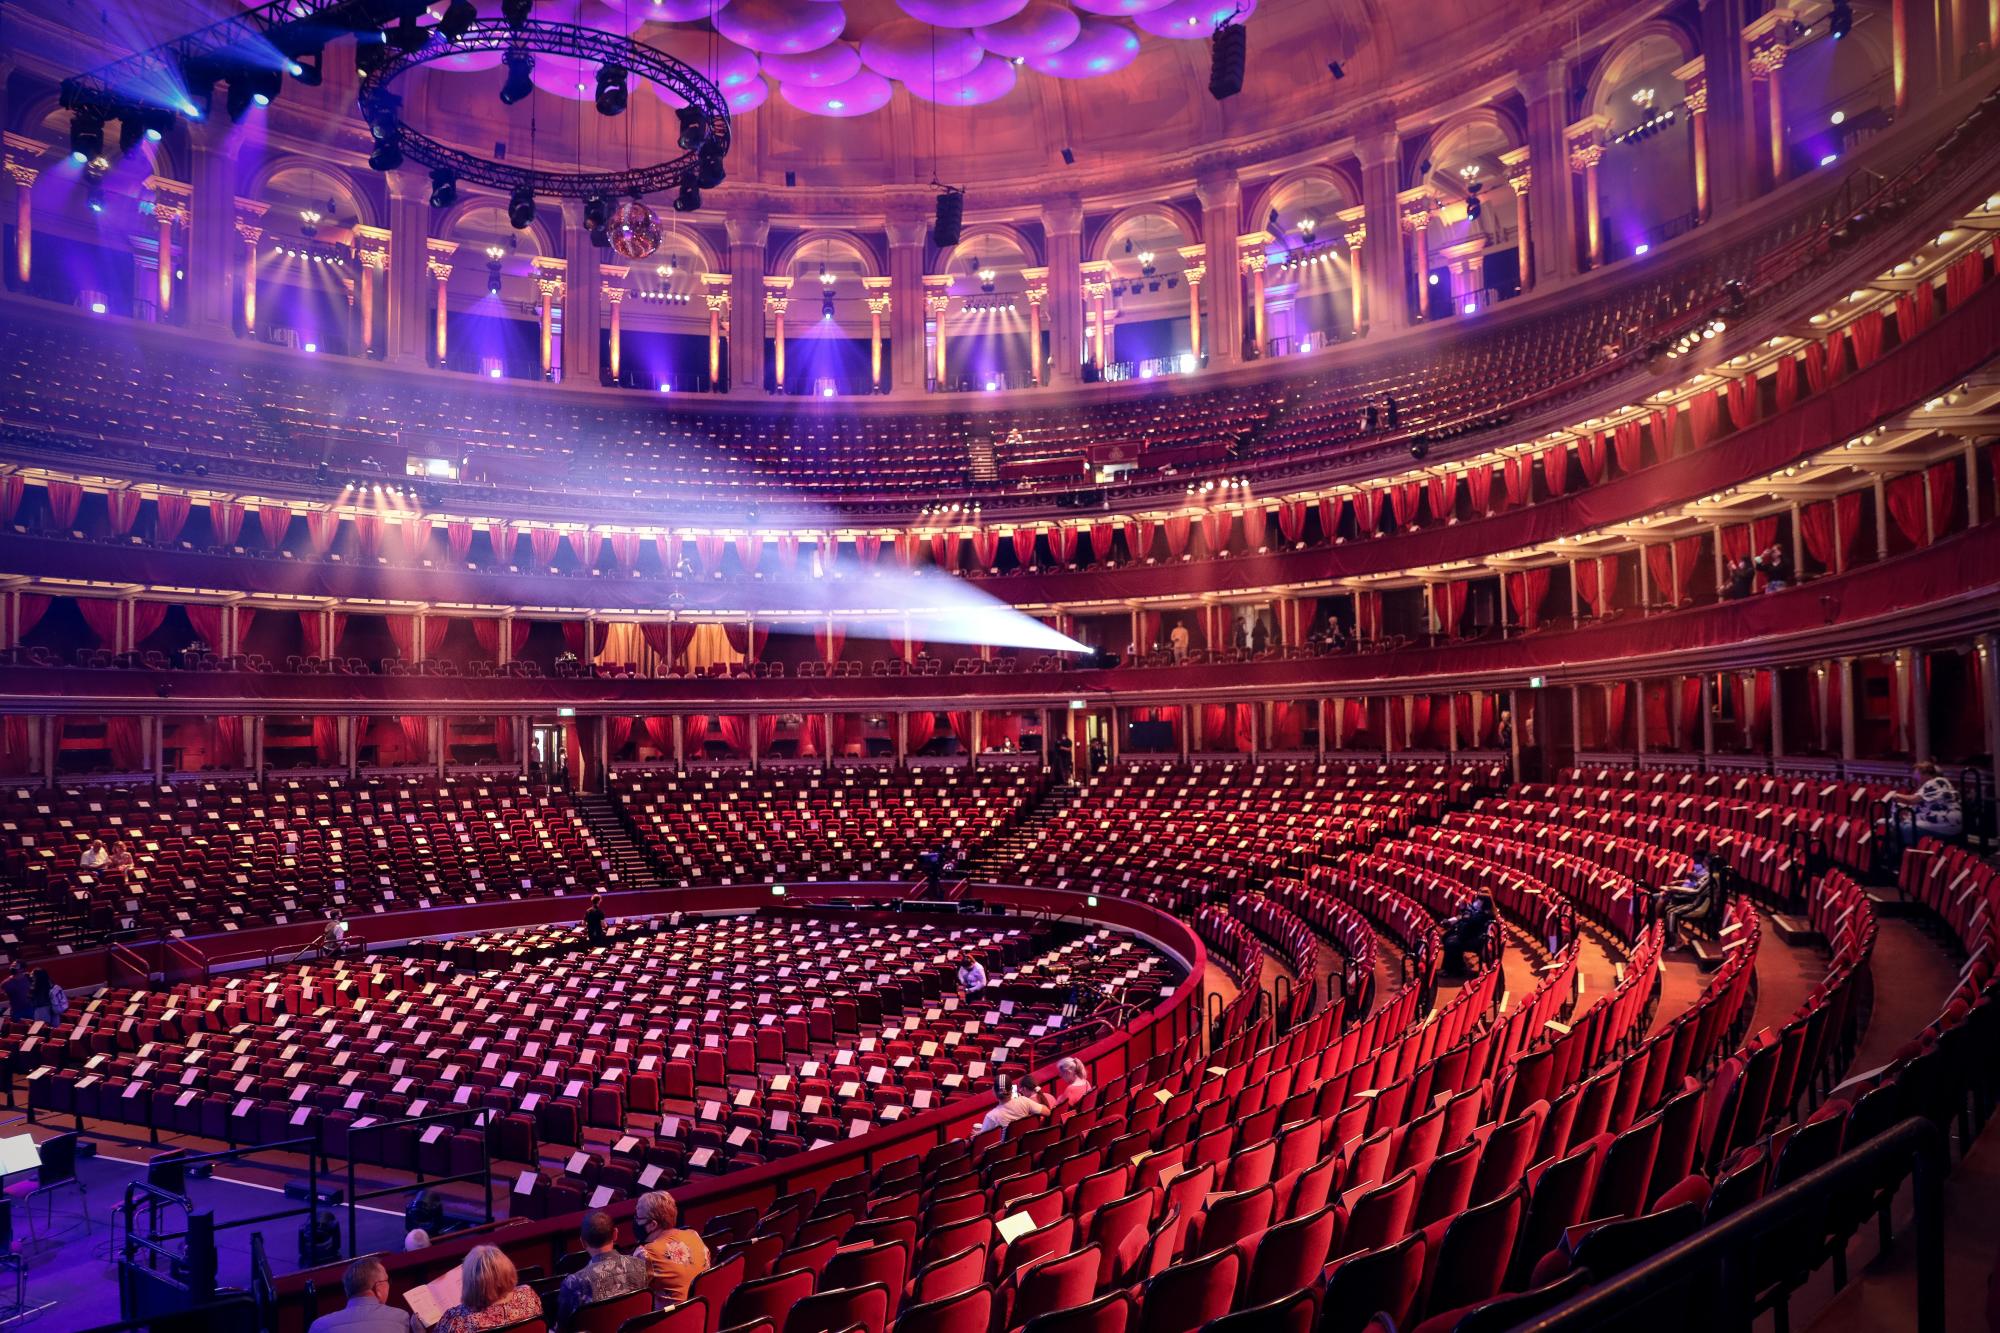 Royal Albert Hall First Historic Building in Europe to Gain Facilities Operations Standard